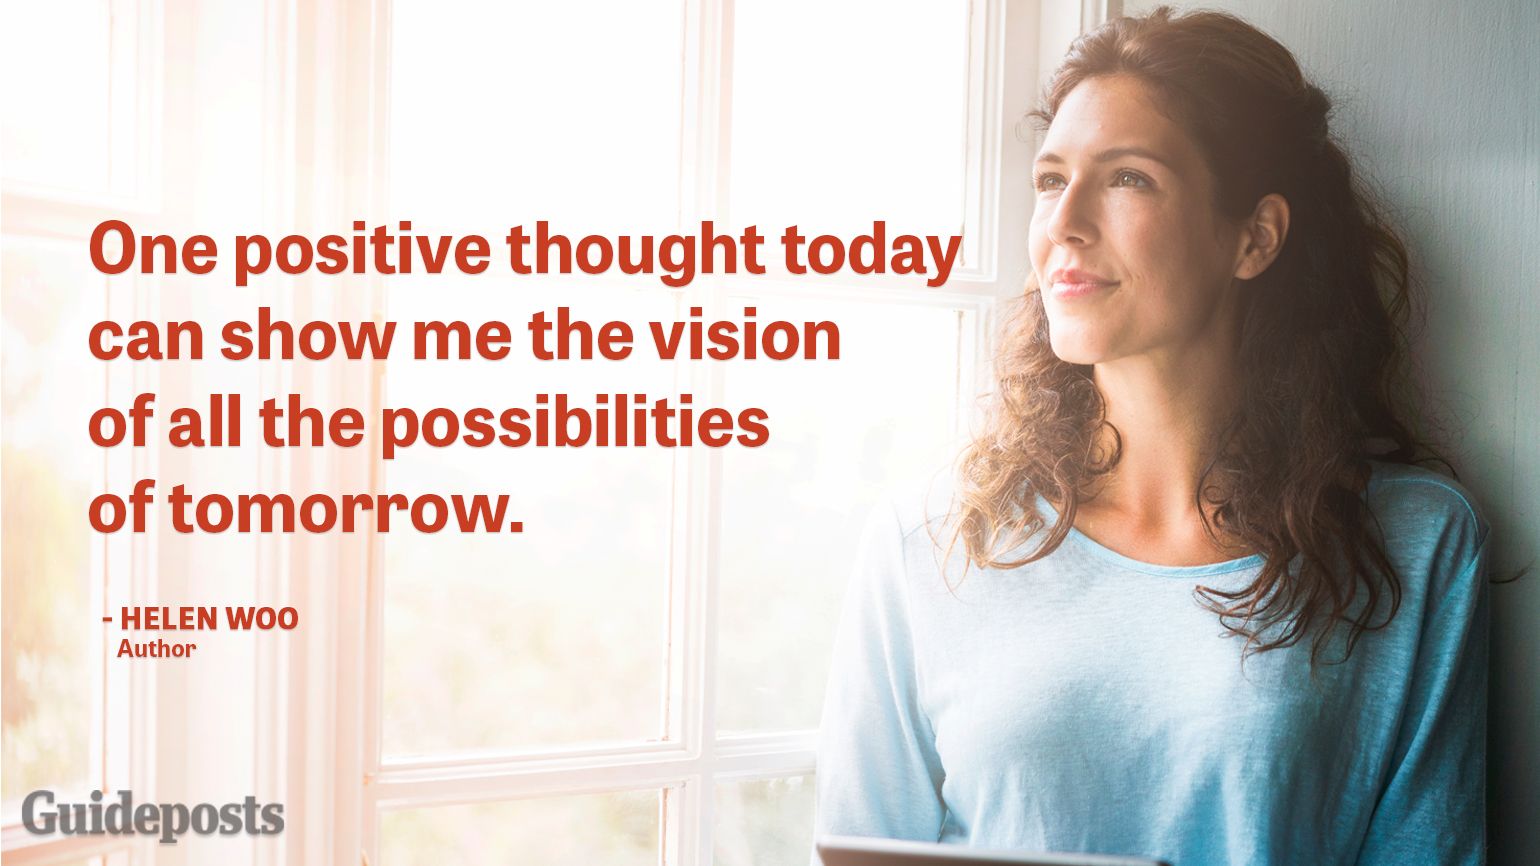 One positive thought today can show me the vision of all the possibilities of tomorrow.